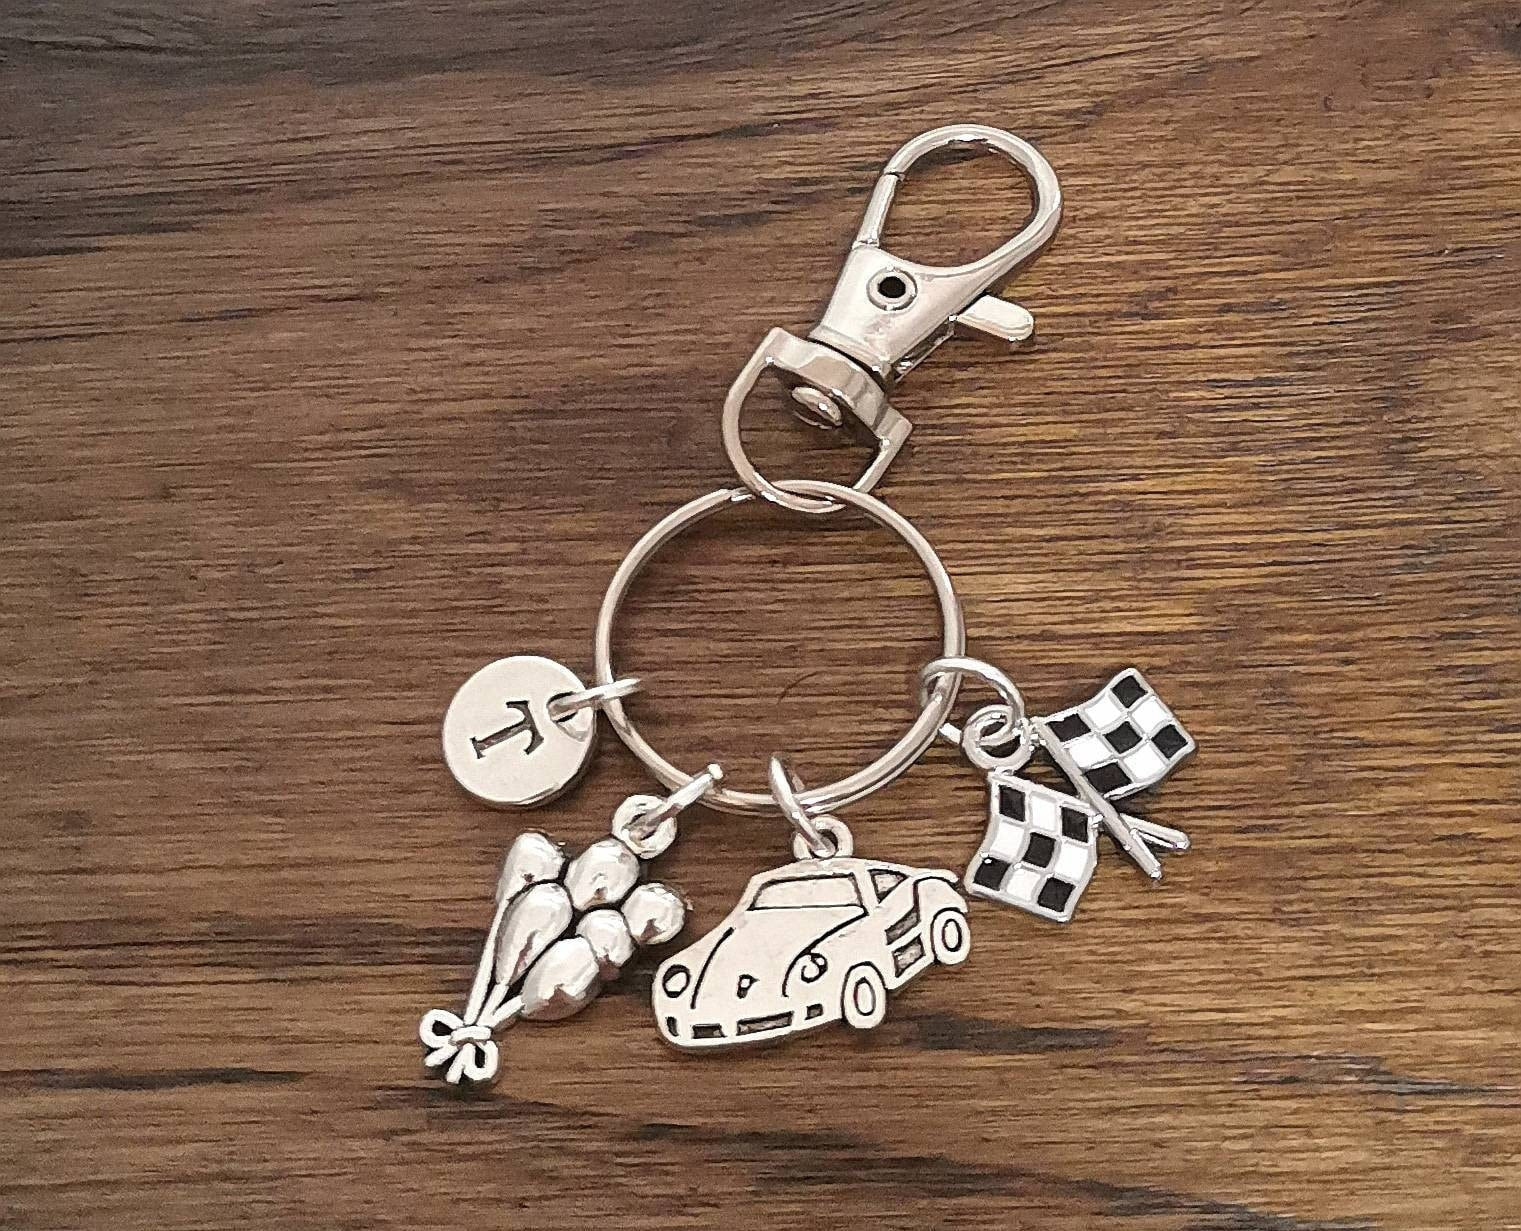 New Driver Gift, New Driver Keyring, New Driver Keychain, Driving Instructor Gifts, Driving Test Gift, Passing Driving,  Driving Test Pass